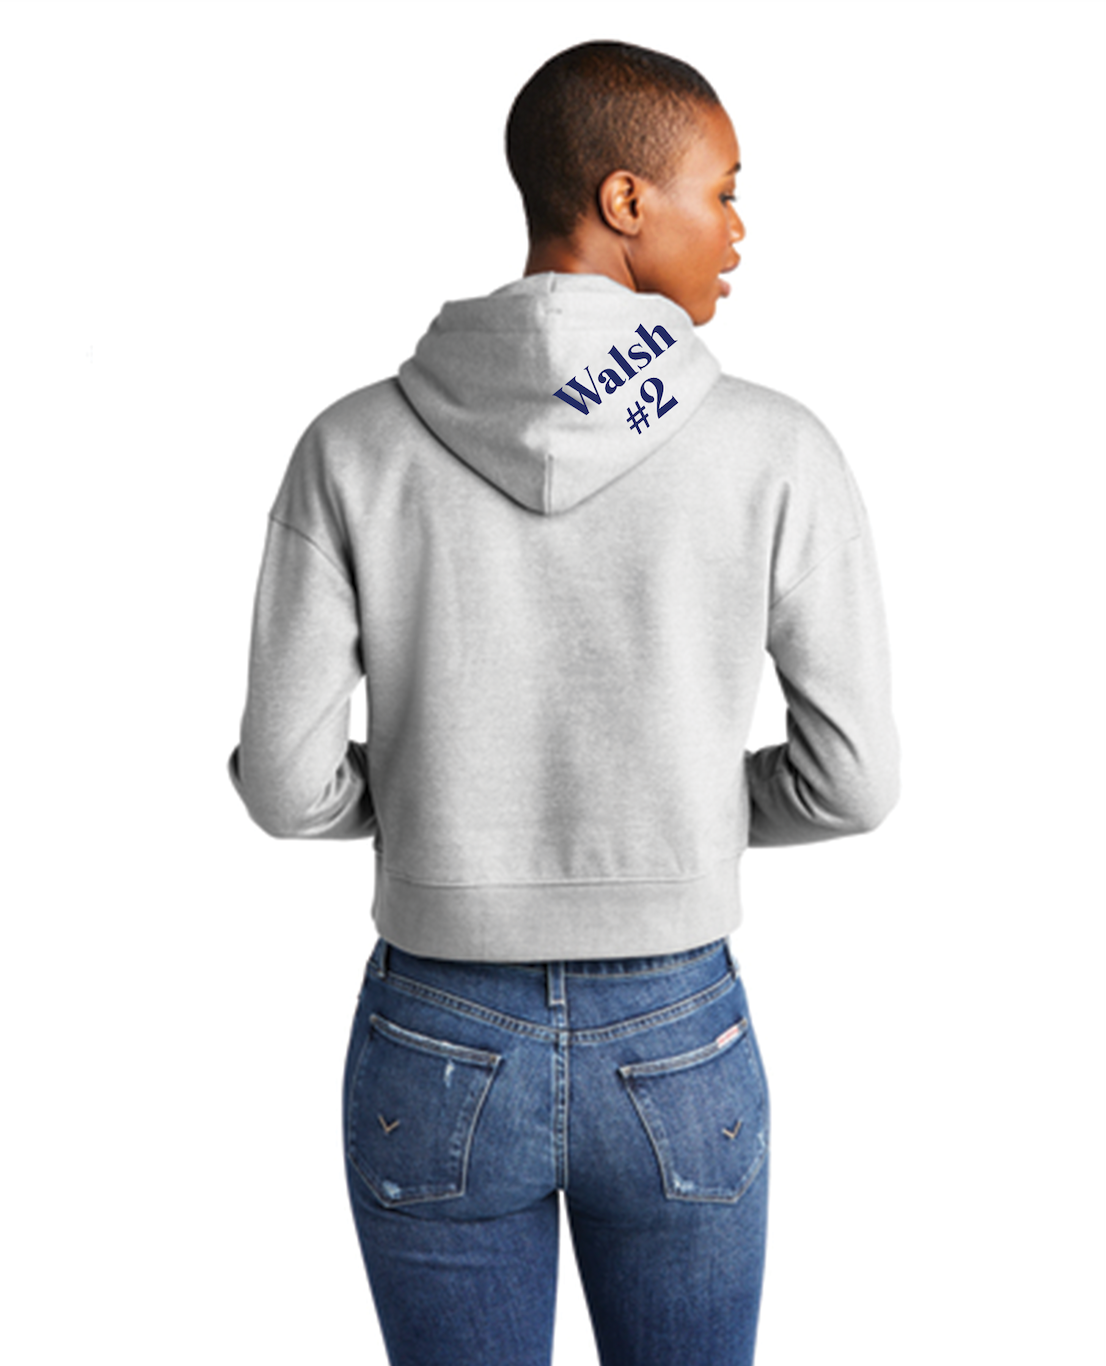 Aspire Volleyball Nationals Women's Cropped Hoodie